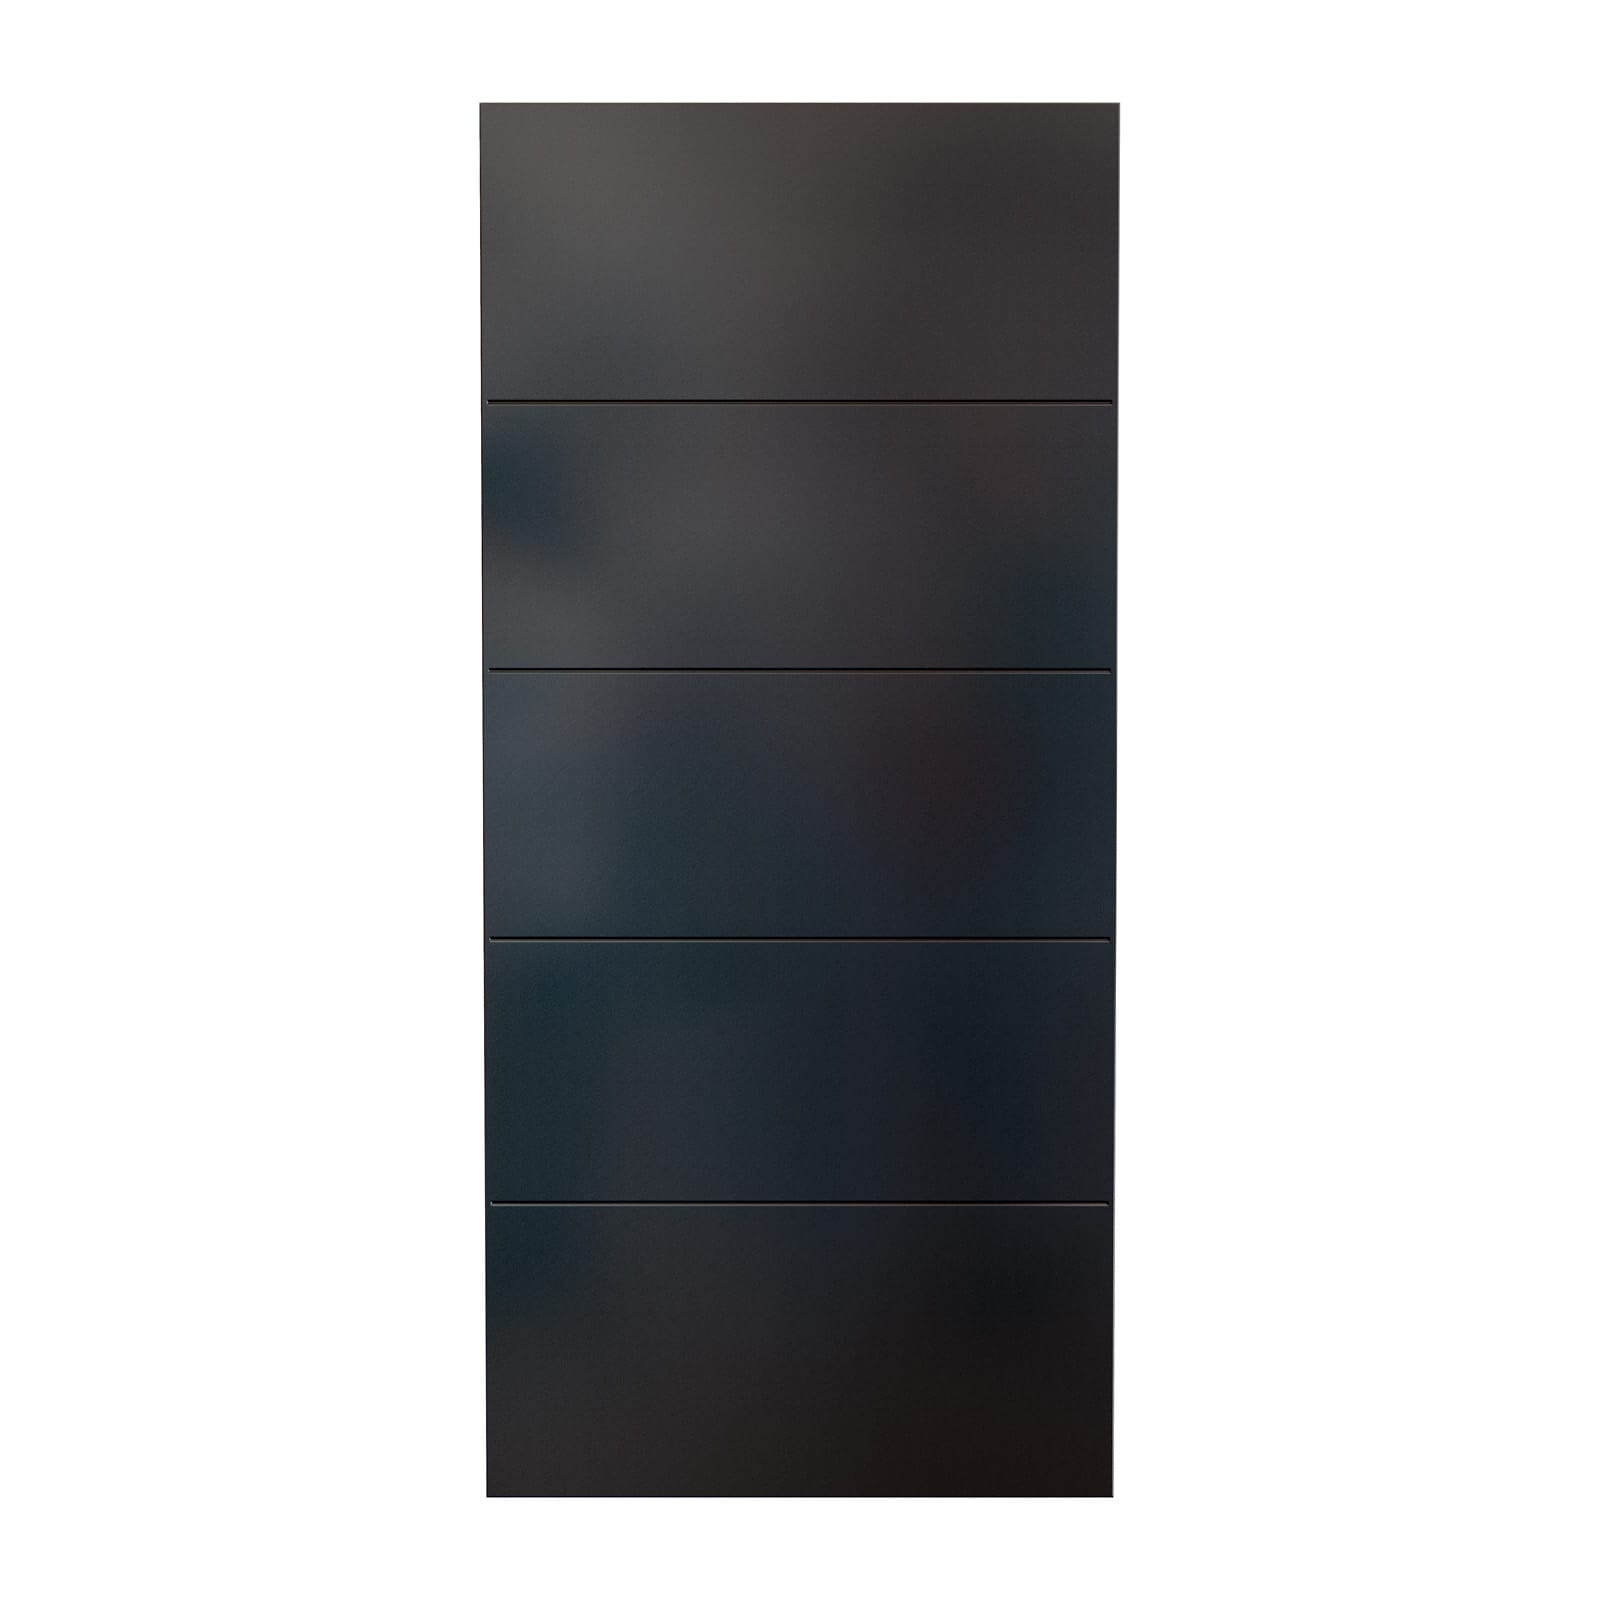 Alitherm 400 Door with PM0004P panel